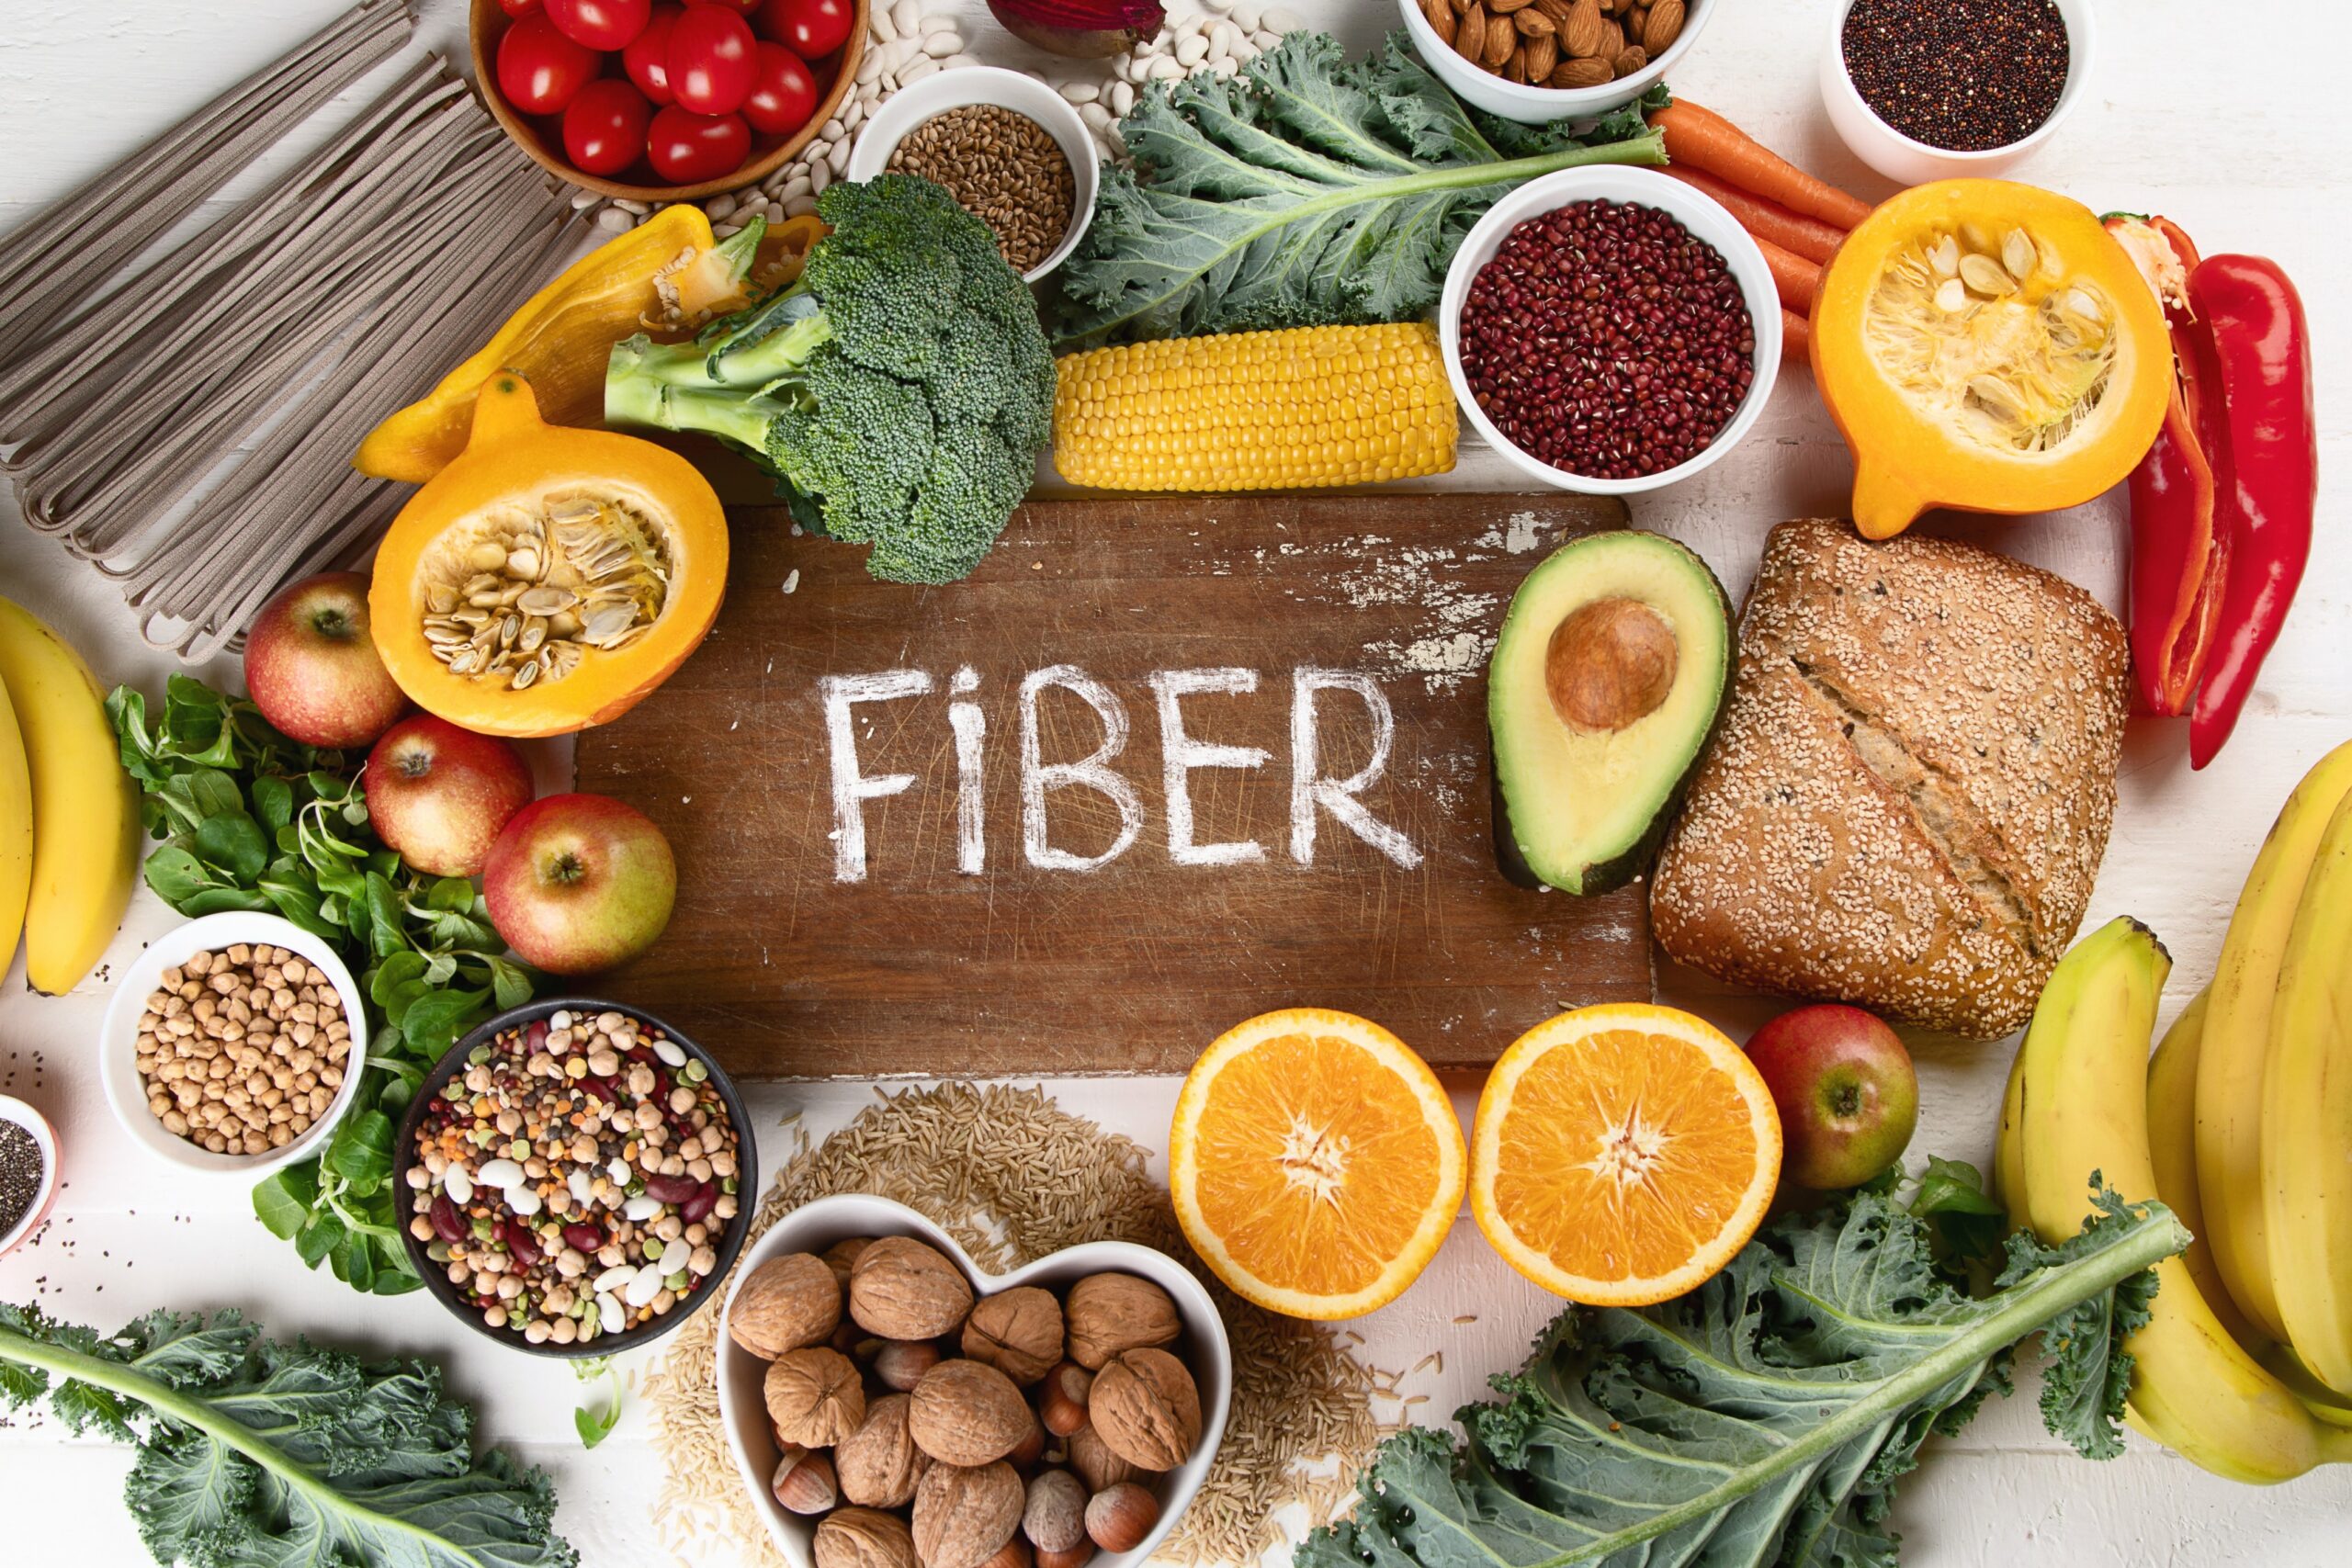 It doesn't matter much which fiber you choose -- just get more fiber!